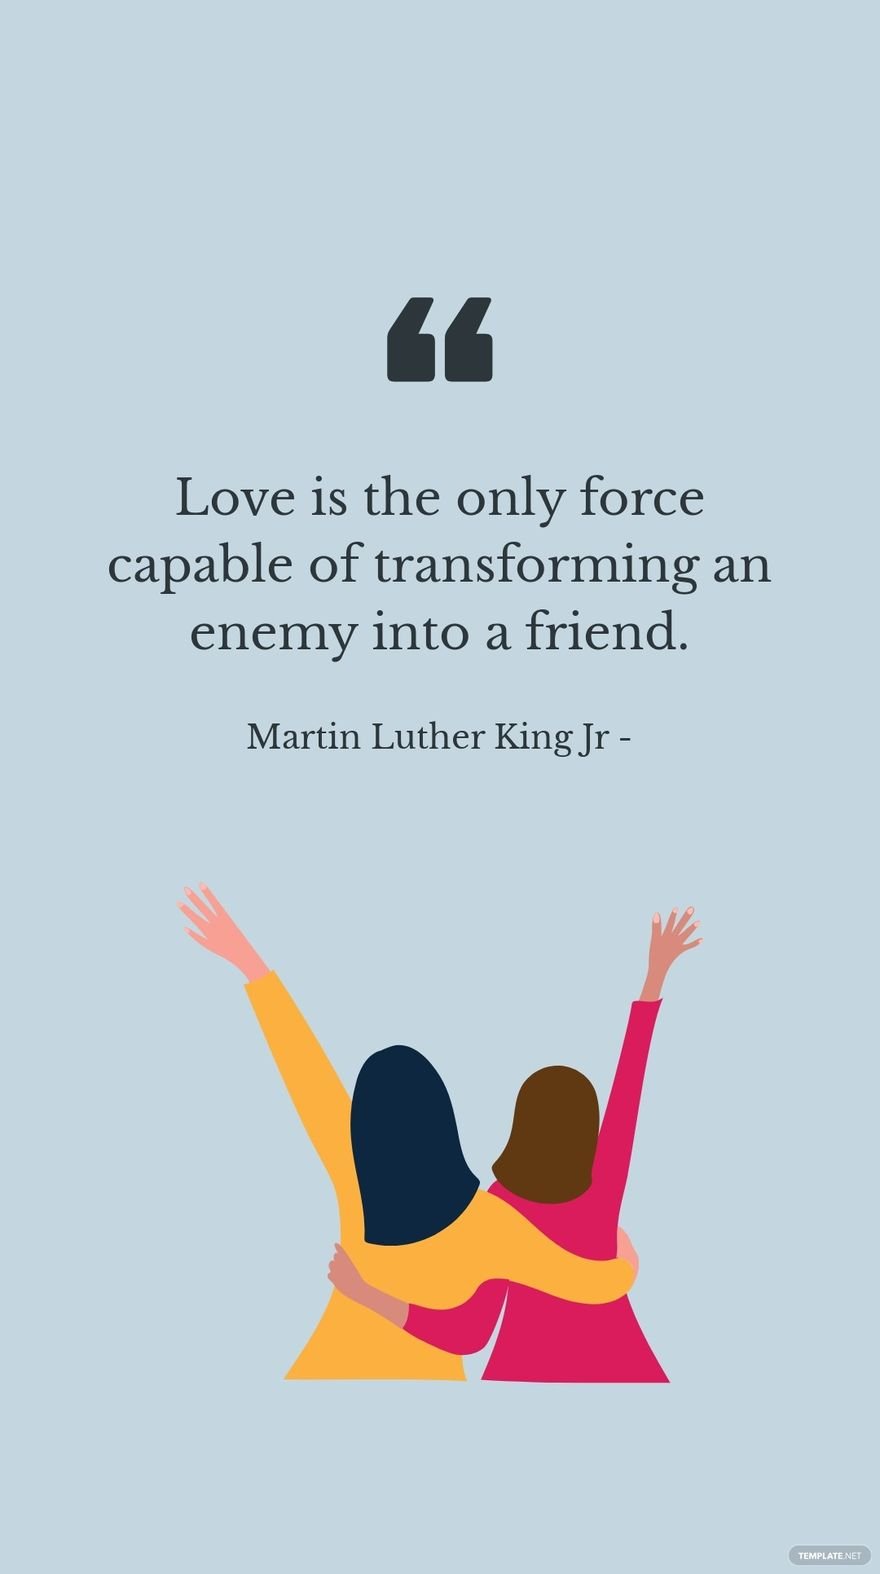 Free Martin Luther King, Jr - Love is the only force capable of transforming an enemy into a friend. in JPG